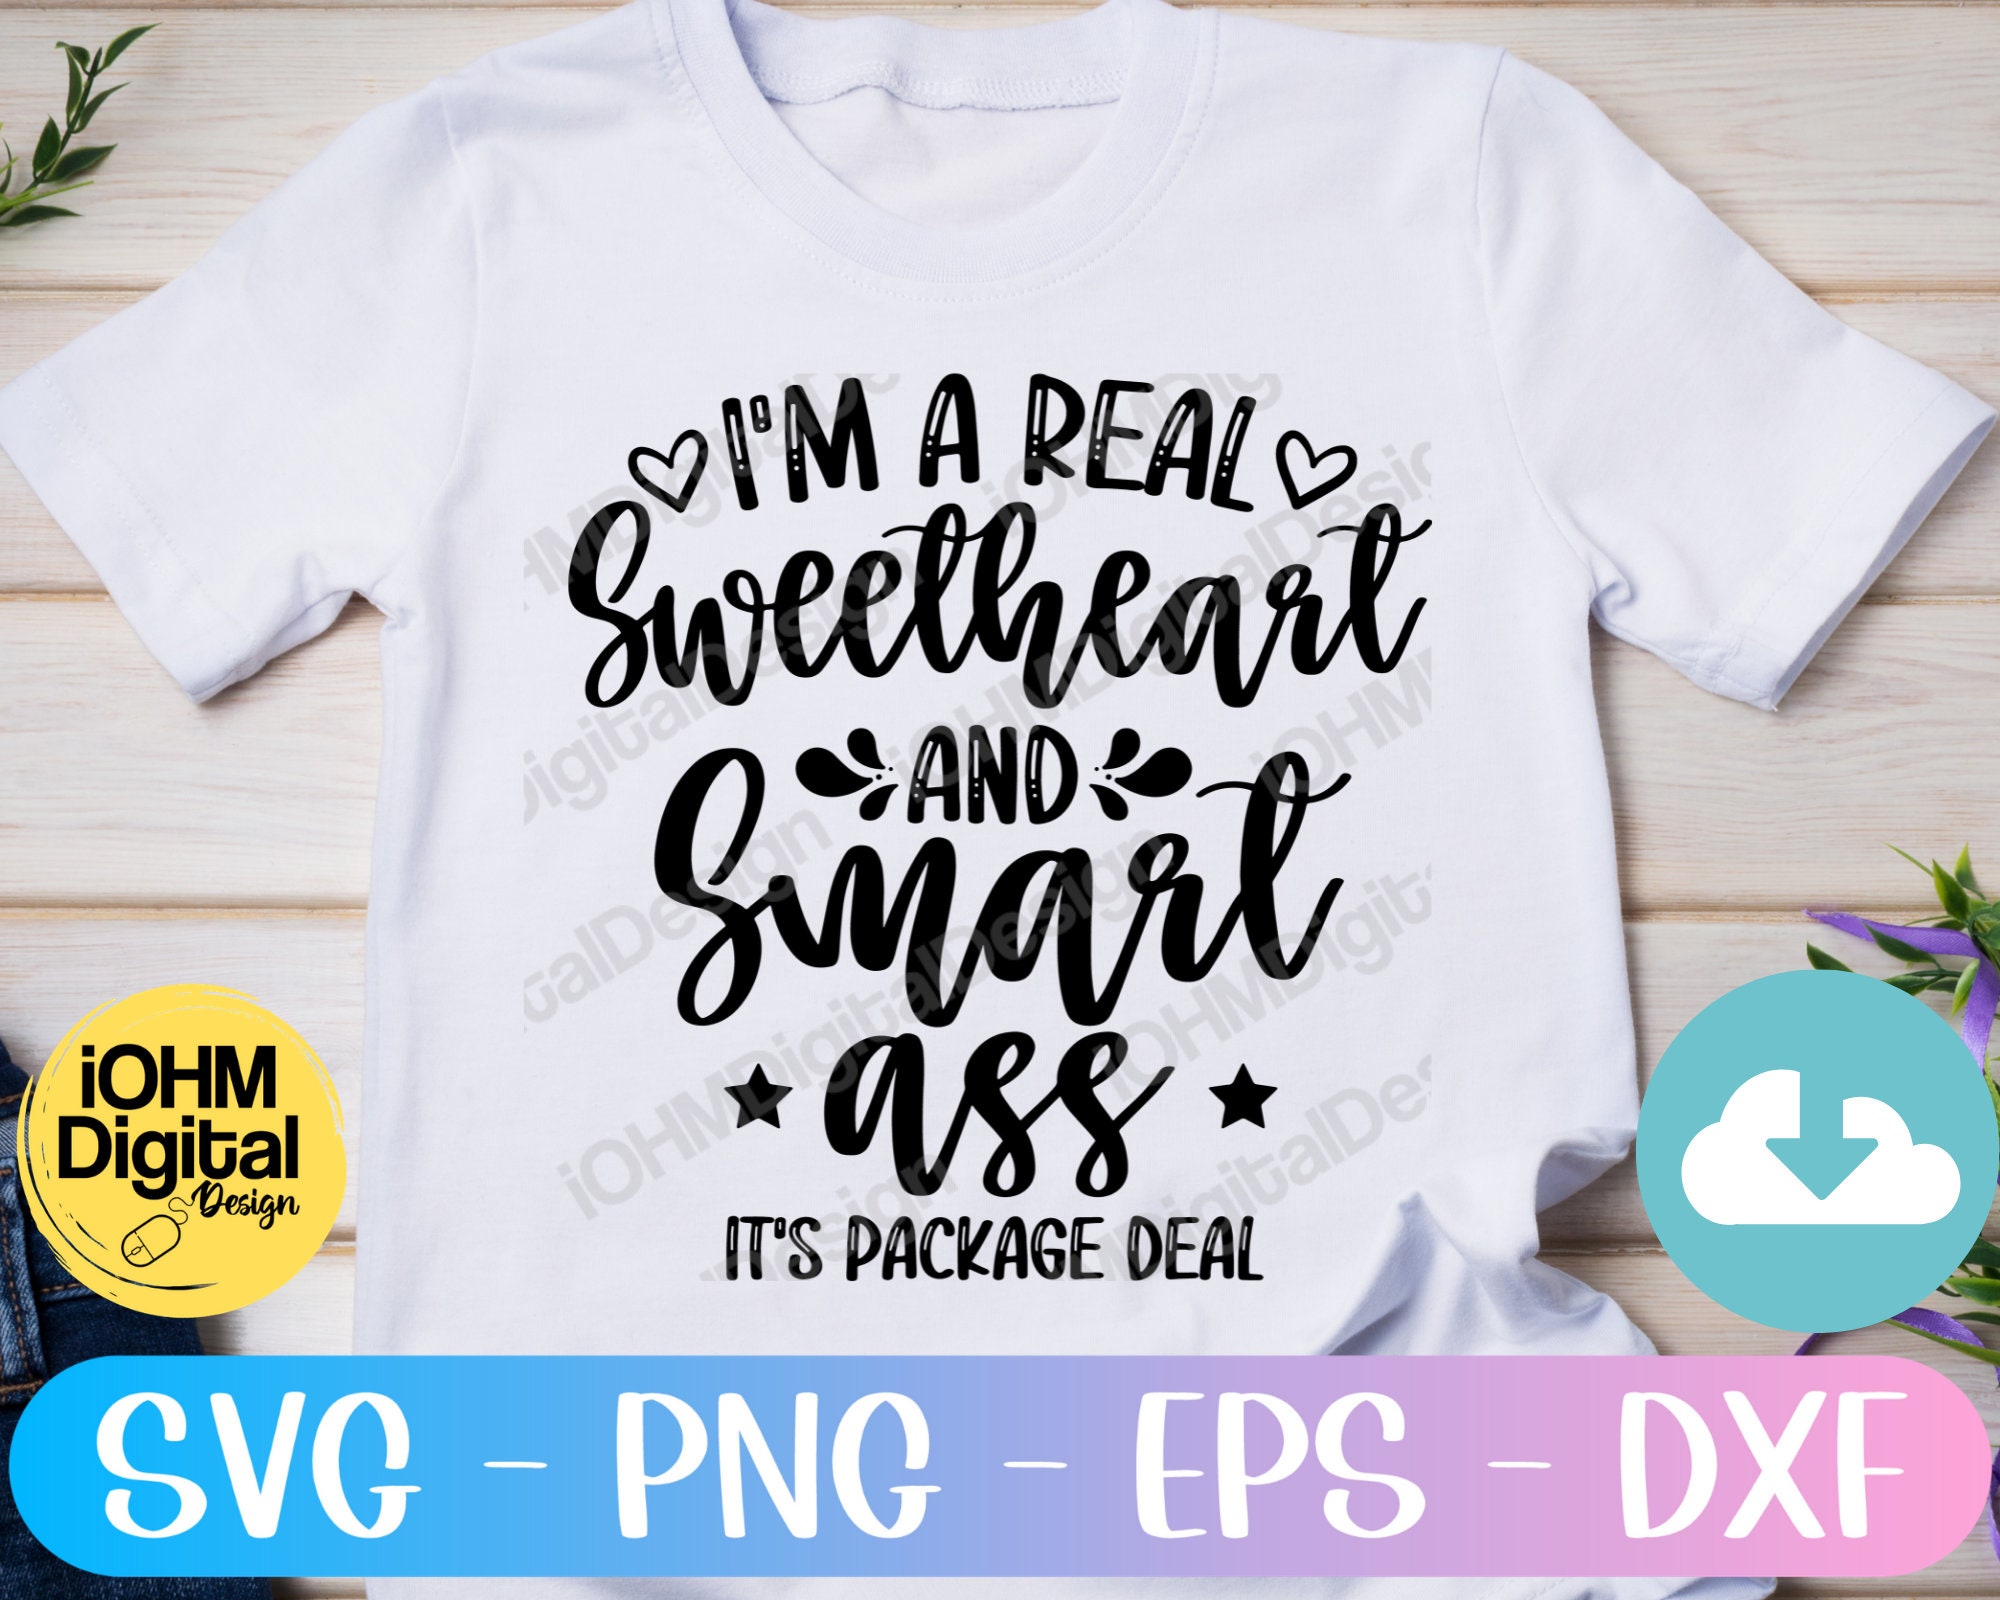 I'm A Real Sweetheart And Smart Ass Svg Png Eps Dxf Cut | Etsy